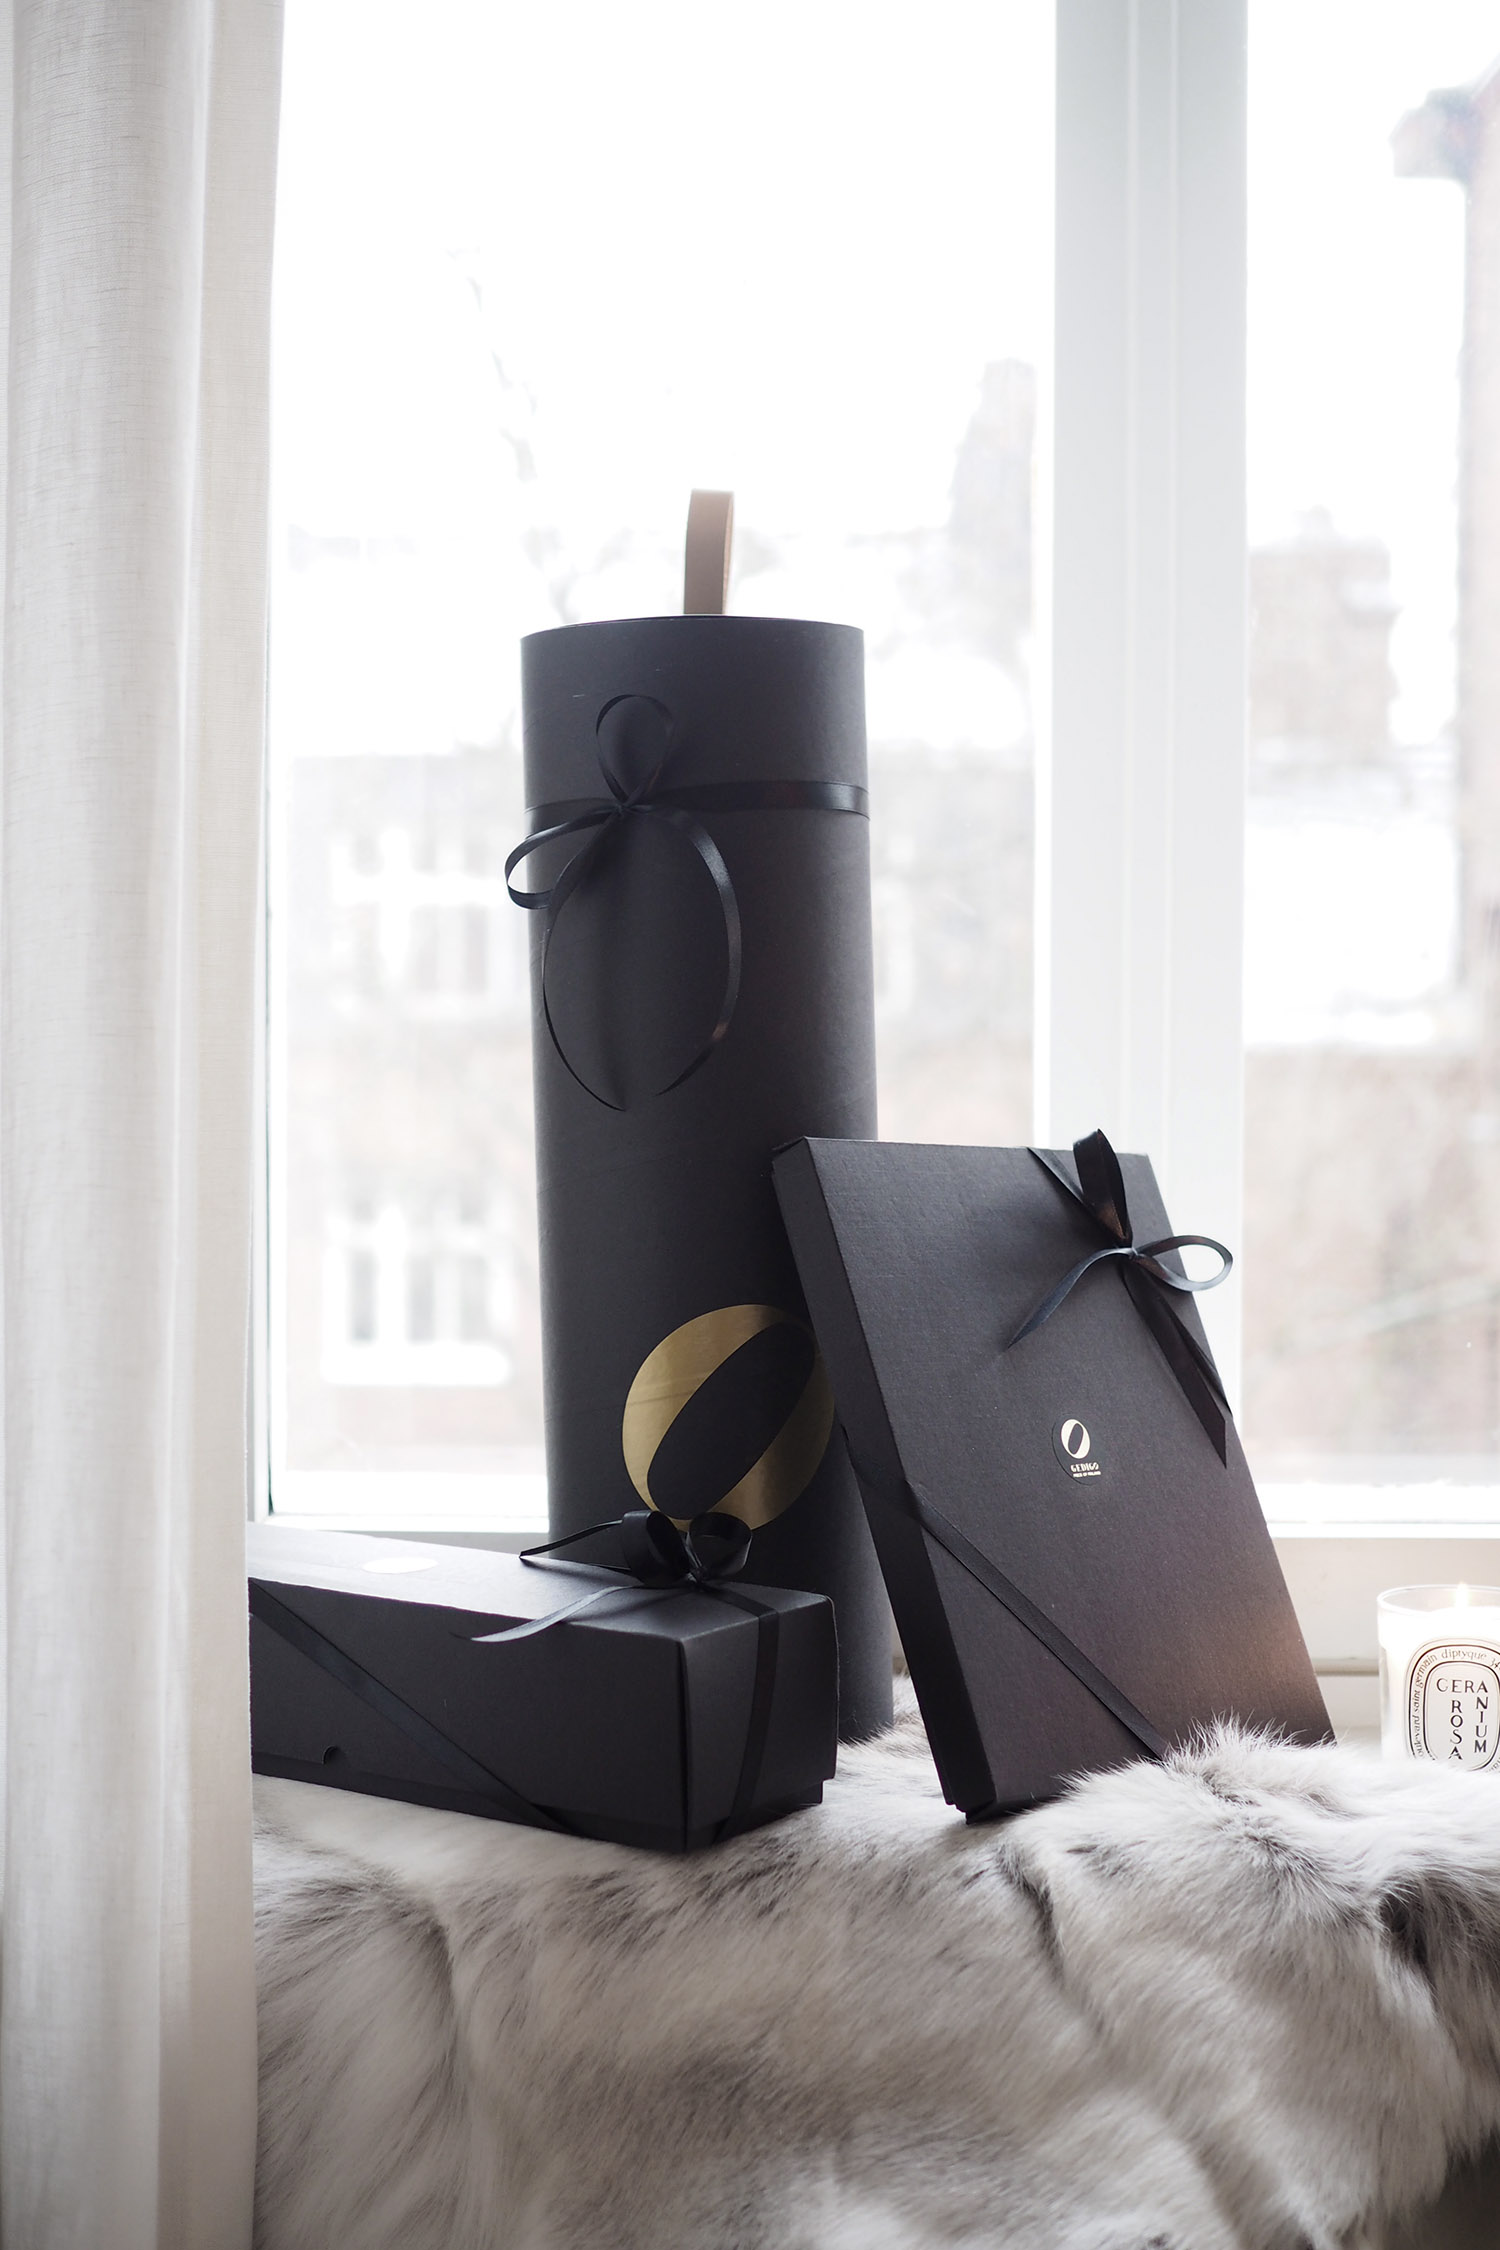 C and the city - In collaboration with Gedigo Piece of Finland - Finnish design products handmade by natural materials - Sustainable lifestyle and home interior design products - Read more on the blog: //www.idealista.fi/charandthecity/2016/12/05/kotimaiset-joululahjat-gedigo